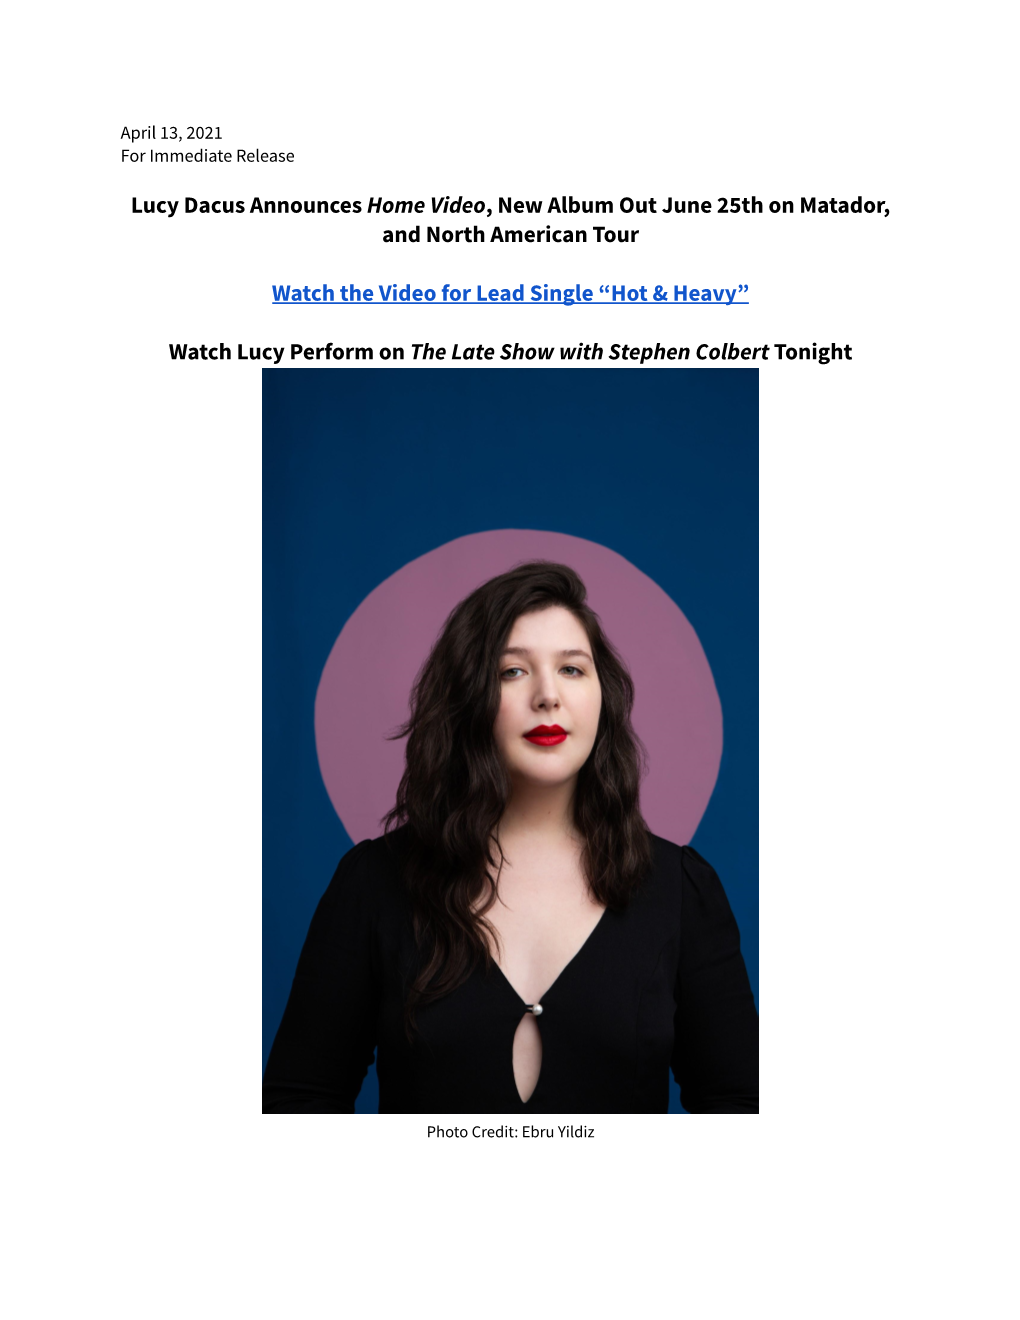 Lucy Dacus Announces Home Video, New Album out June 25Th on Matador, and North American Tour